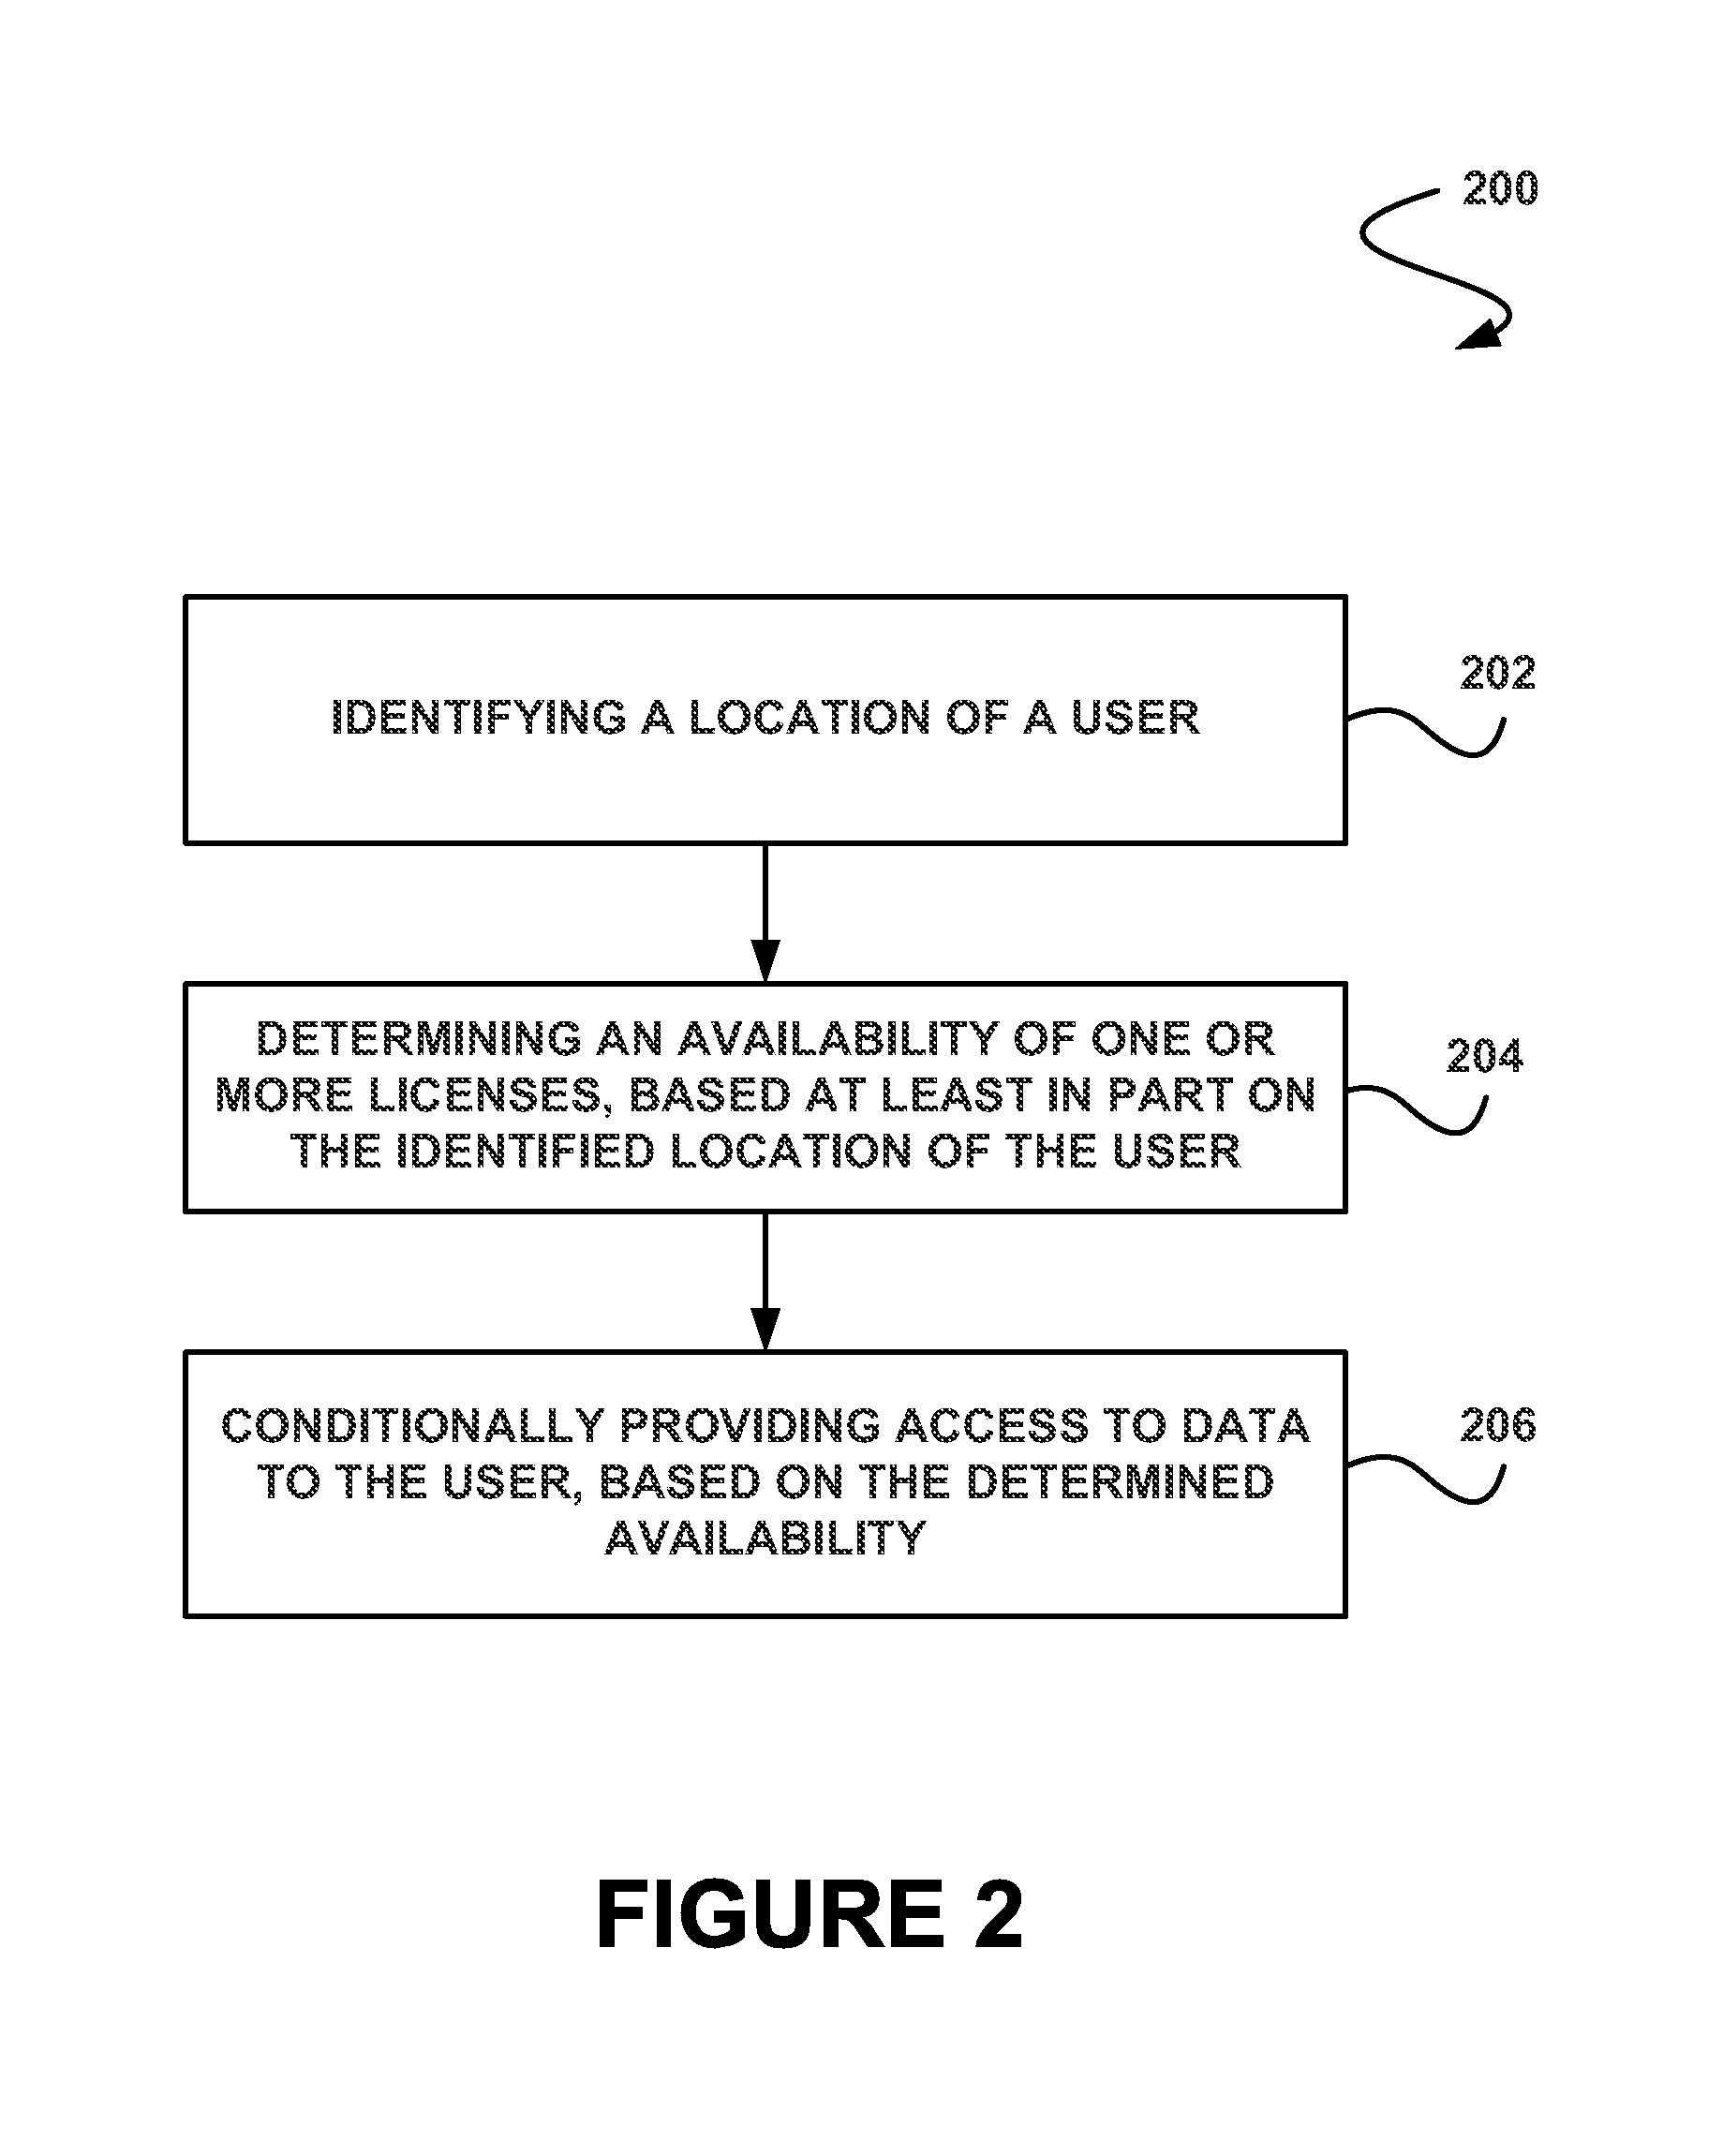 System, method and computer program product for managing access to systems, products, and data based on information associated with a physical location of a user